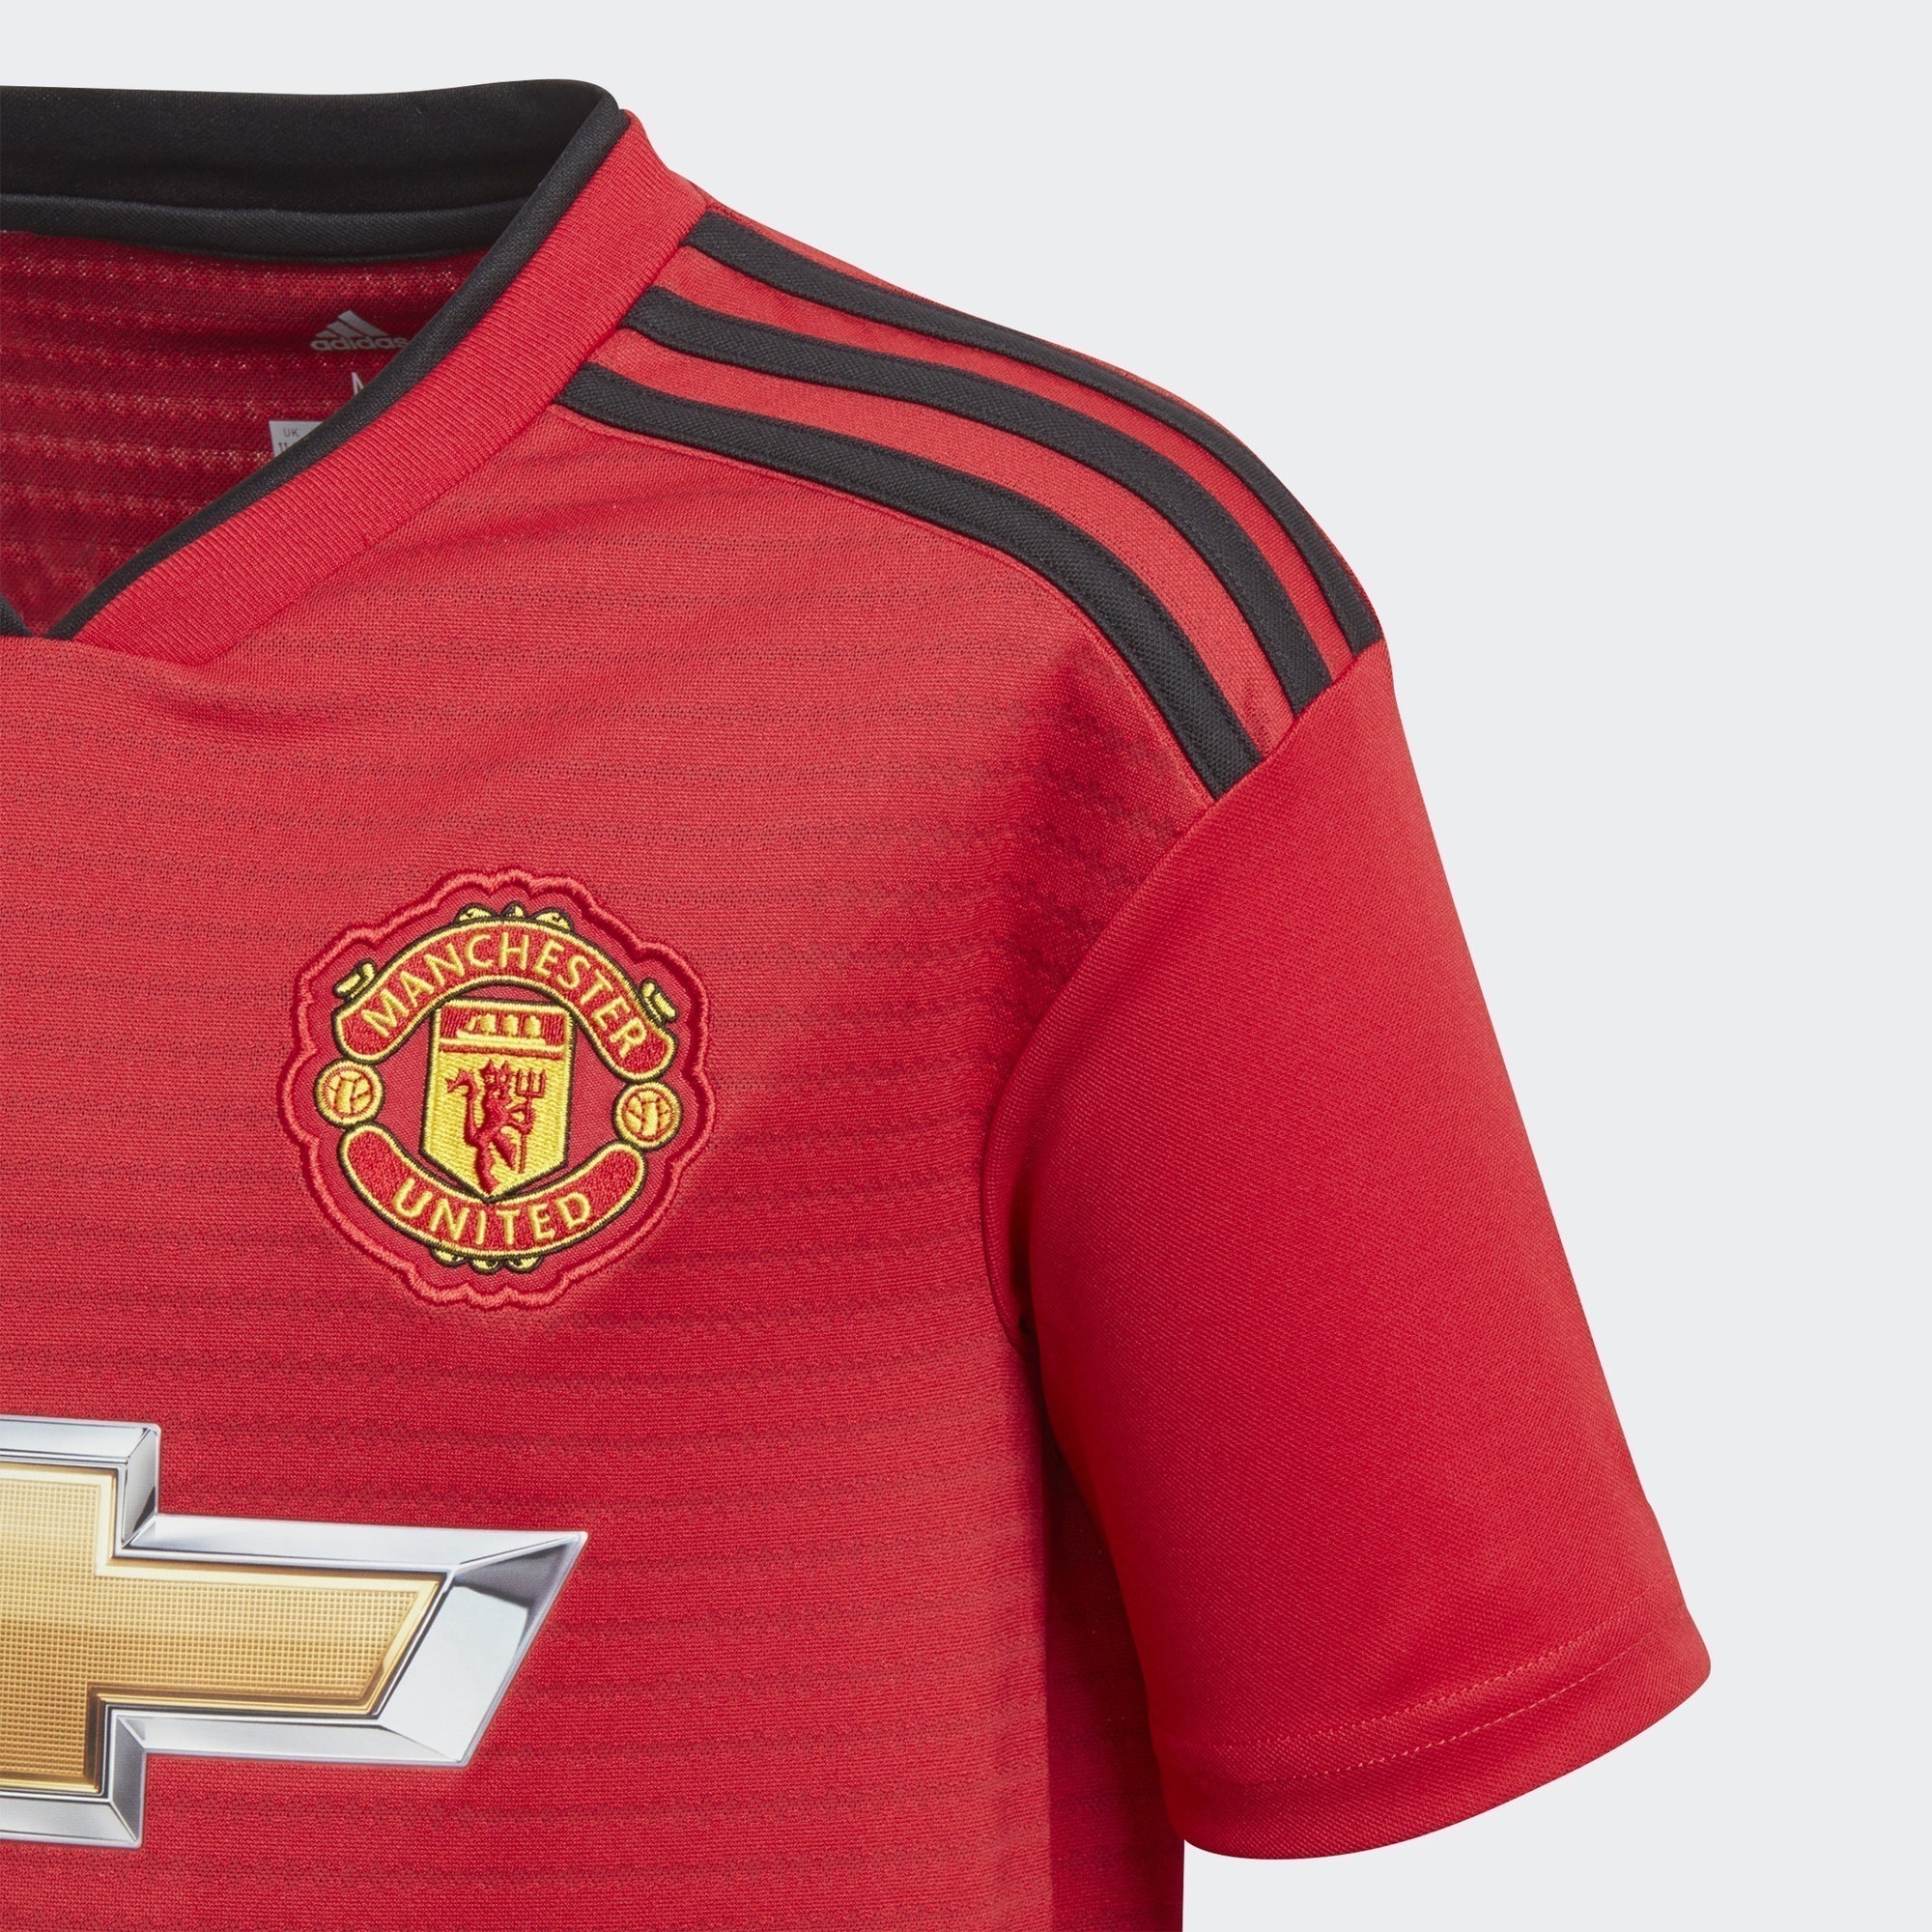 Kid's Manchester United 18/19 Home Jersey - Red/Black - Niky's Sports